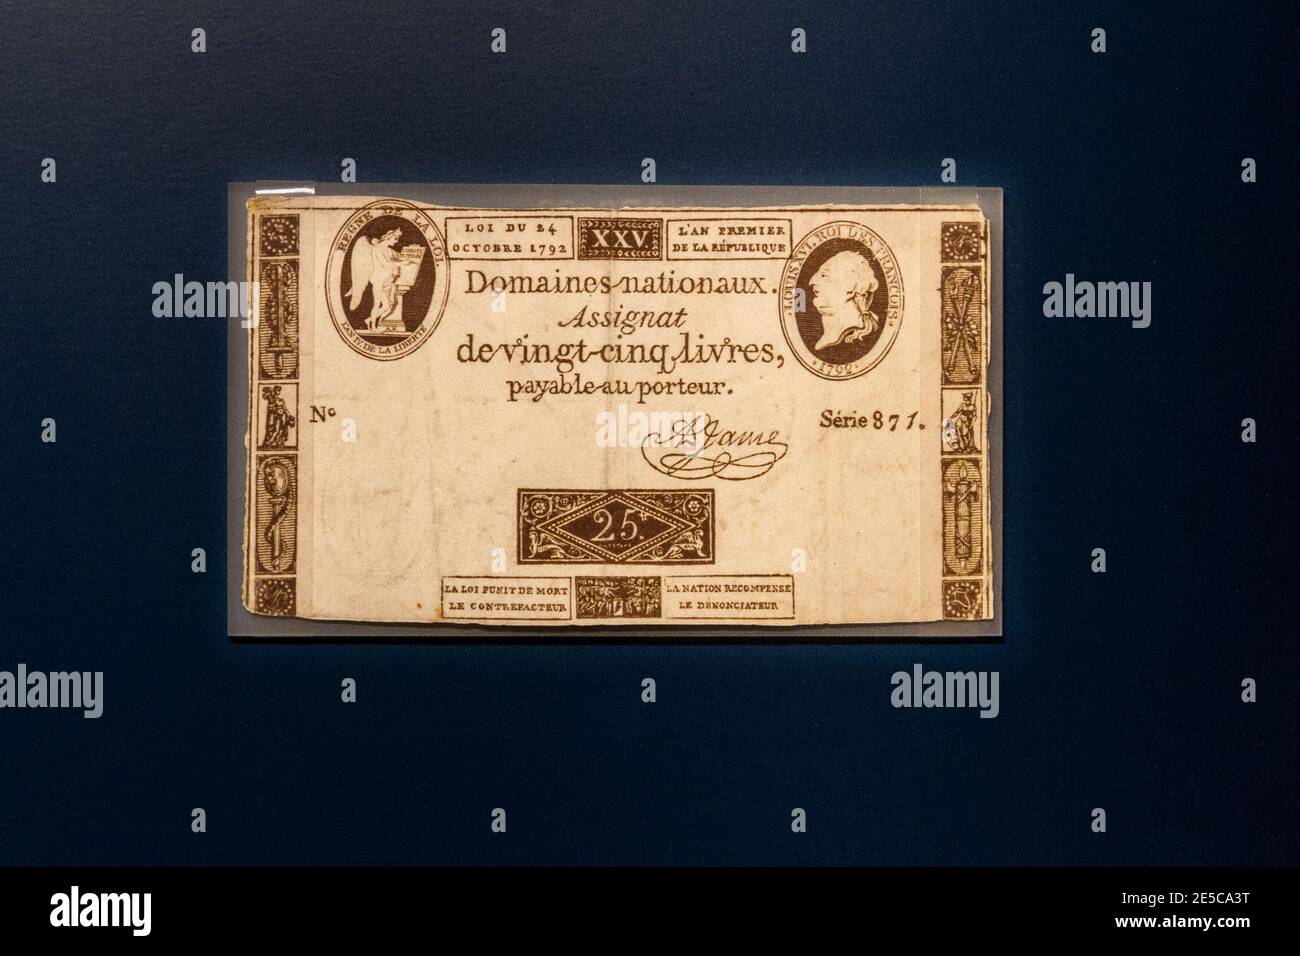 25 livre note or assignat of the French Republic (1792), the Money Gallery, Ashmolean Museum, Oxford, UK. Stock Photo